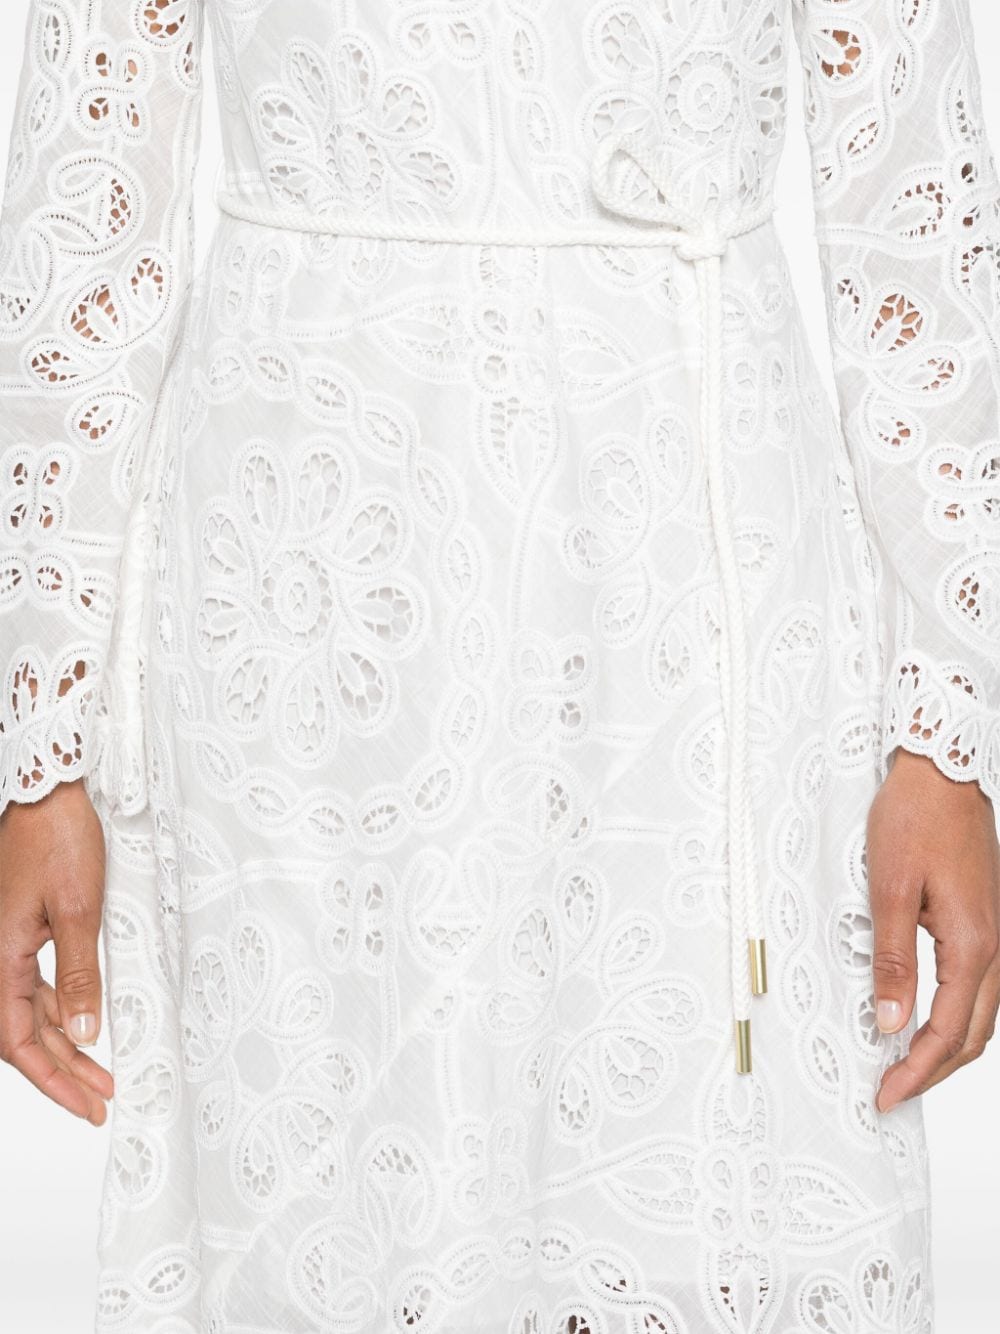 Ottie Embroidered Long Dress in Ivory